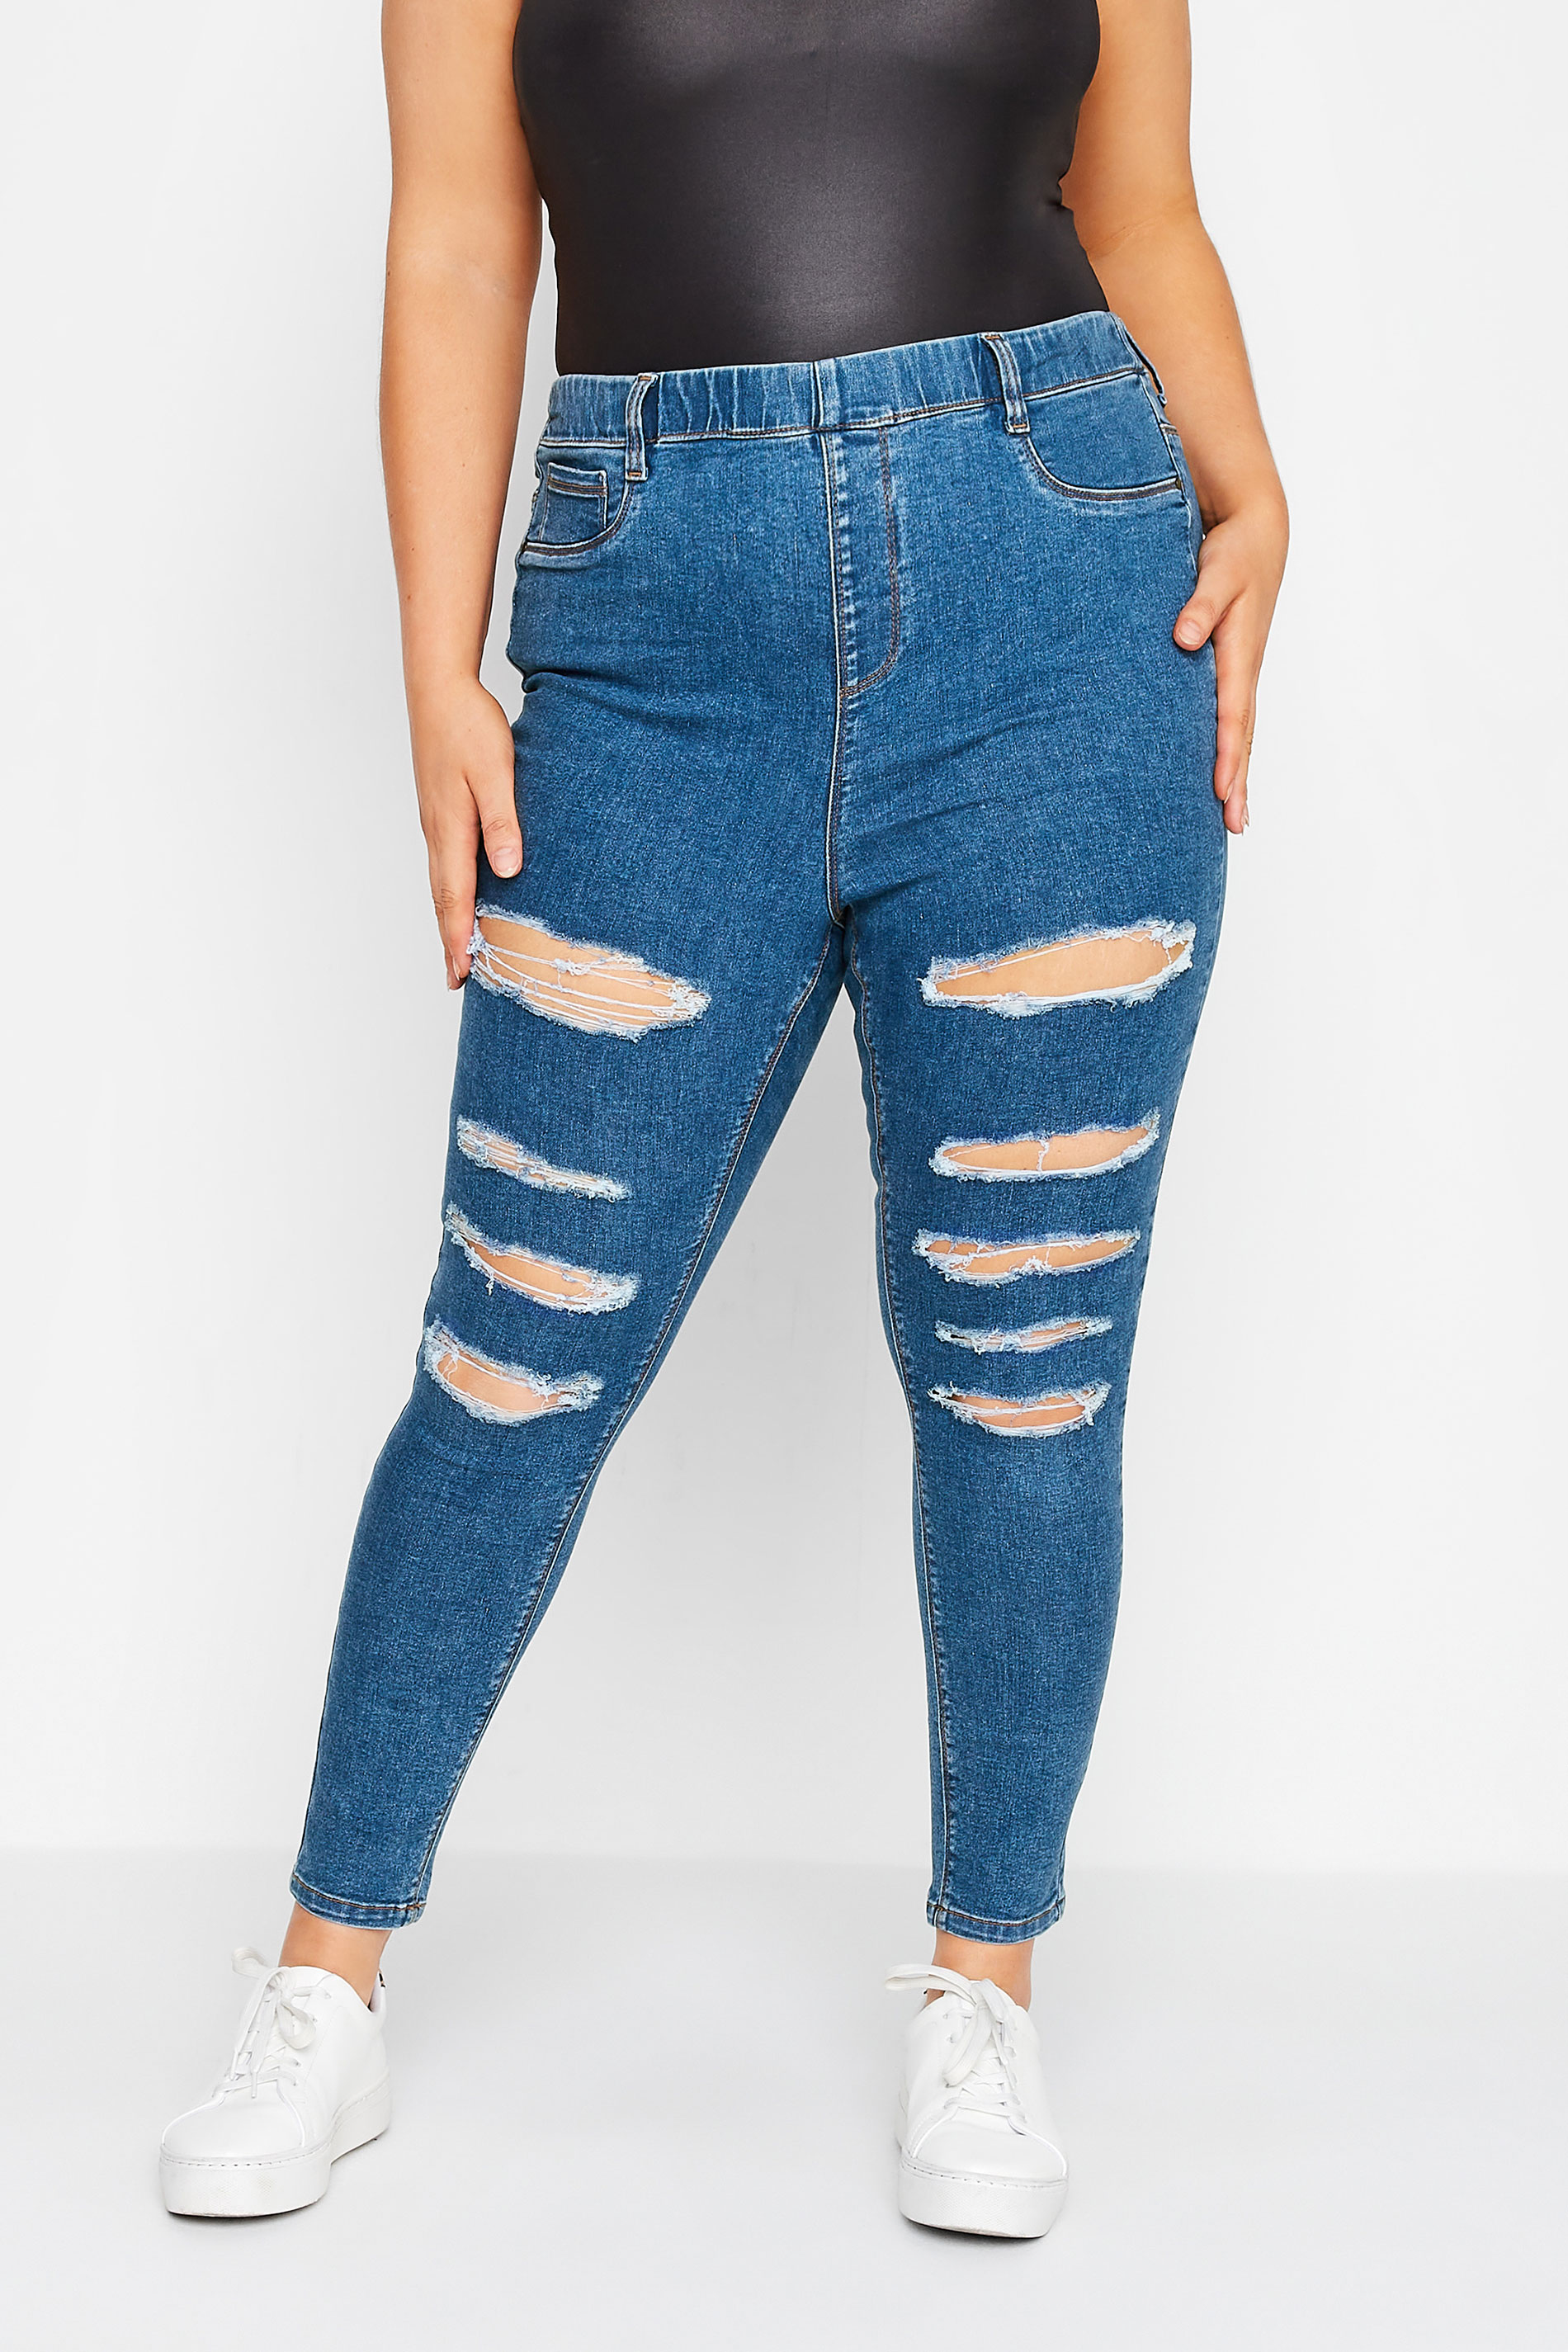 Plus Size Blue Ripped GRACE Jeggings | Yours Clothing 1